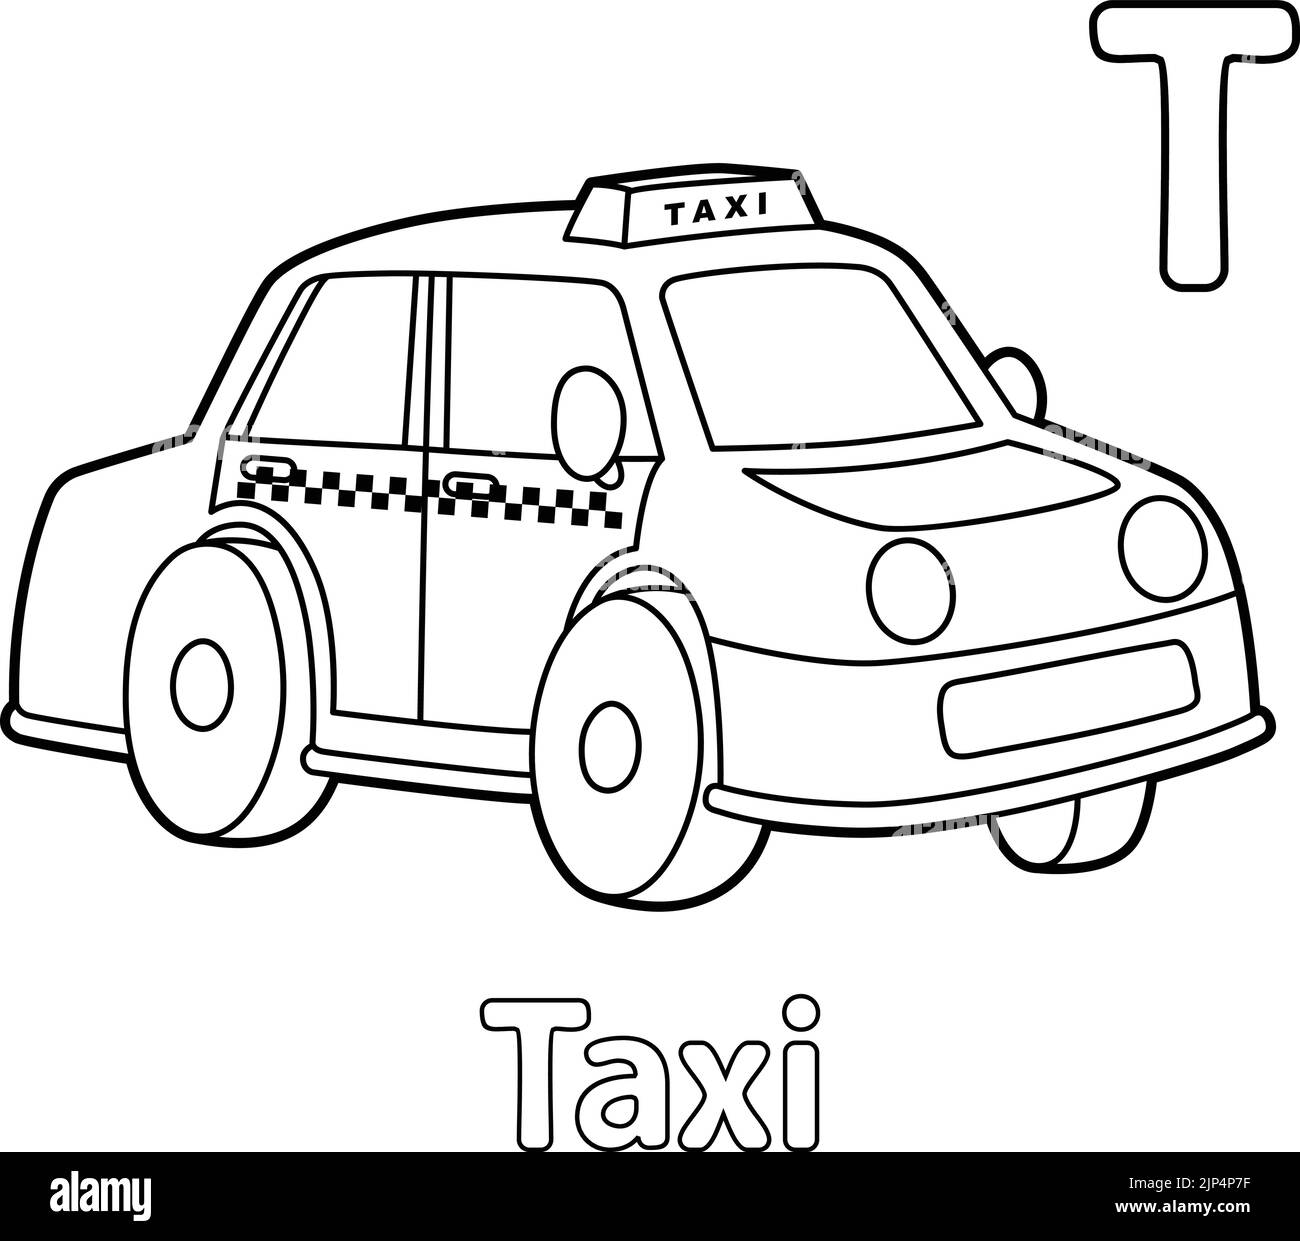 Taxi Alphabet ABC Coloring Page T Stock Vector